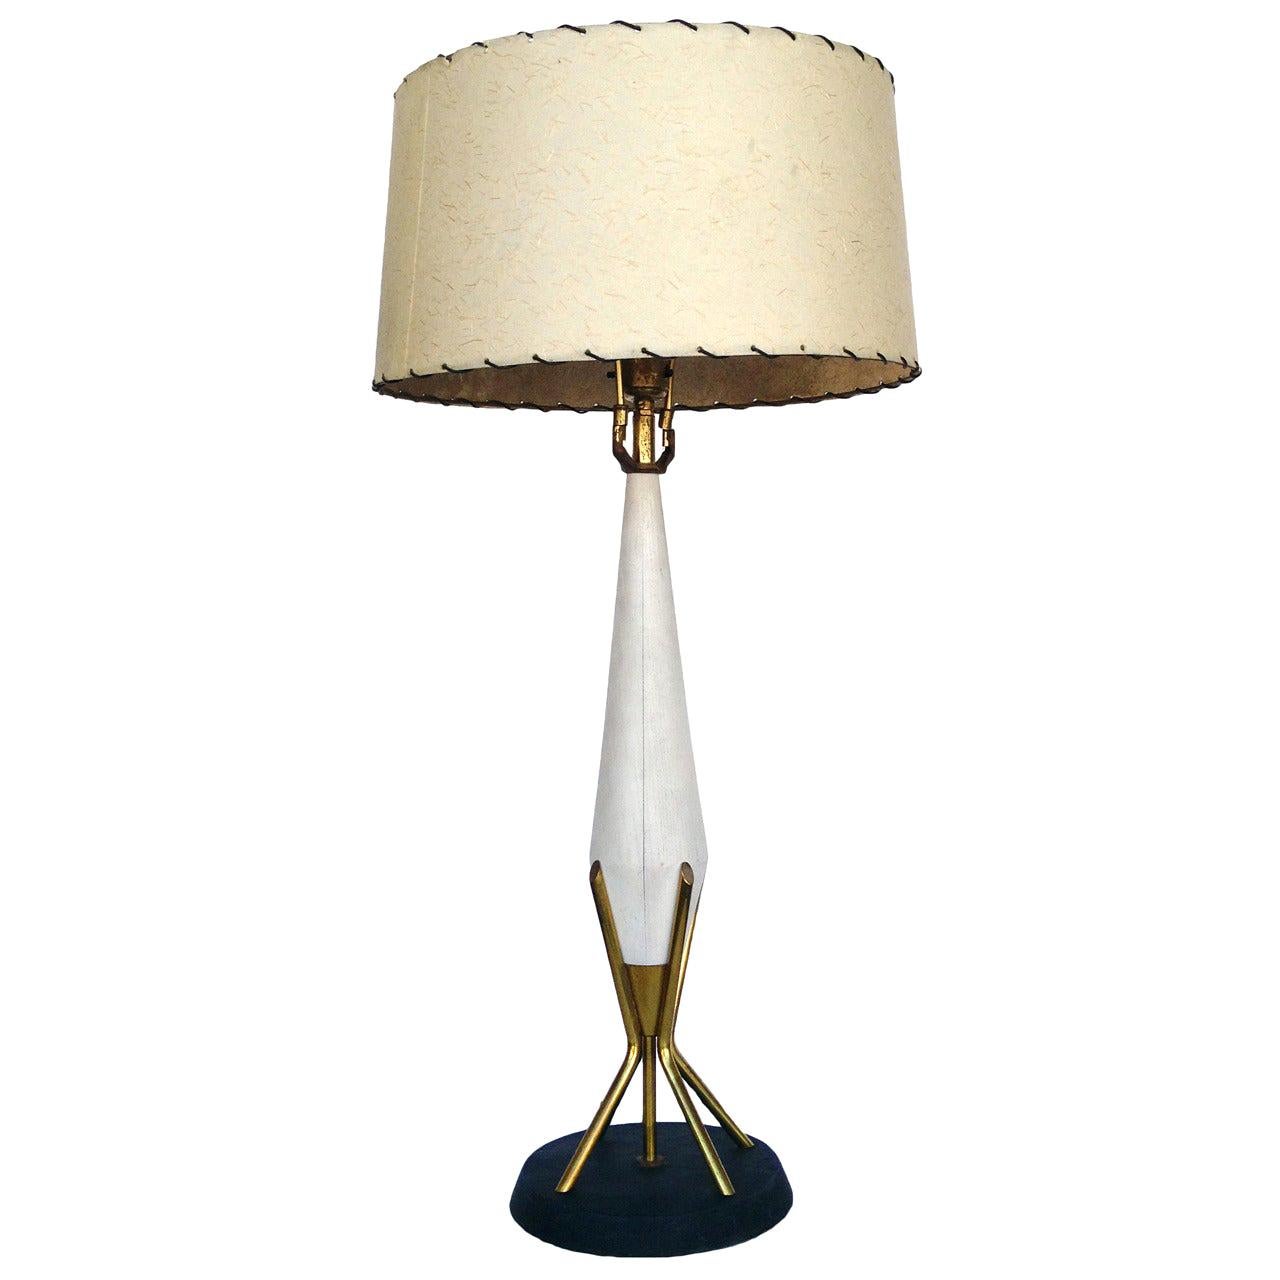 Gerald Thurston Style Sculpted Table Lamp with Brass Base